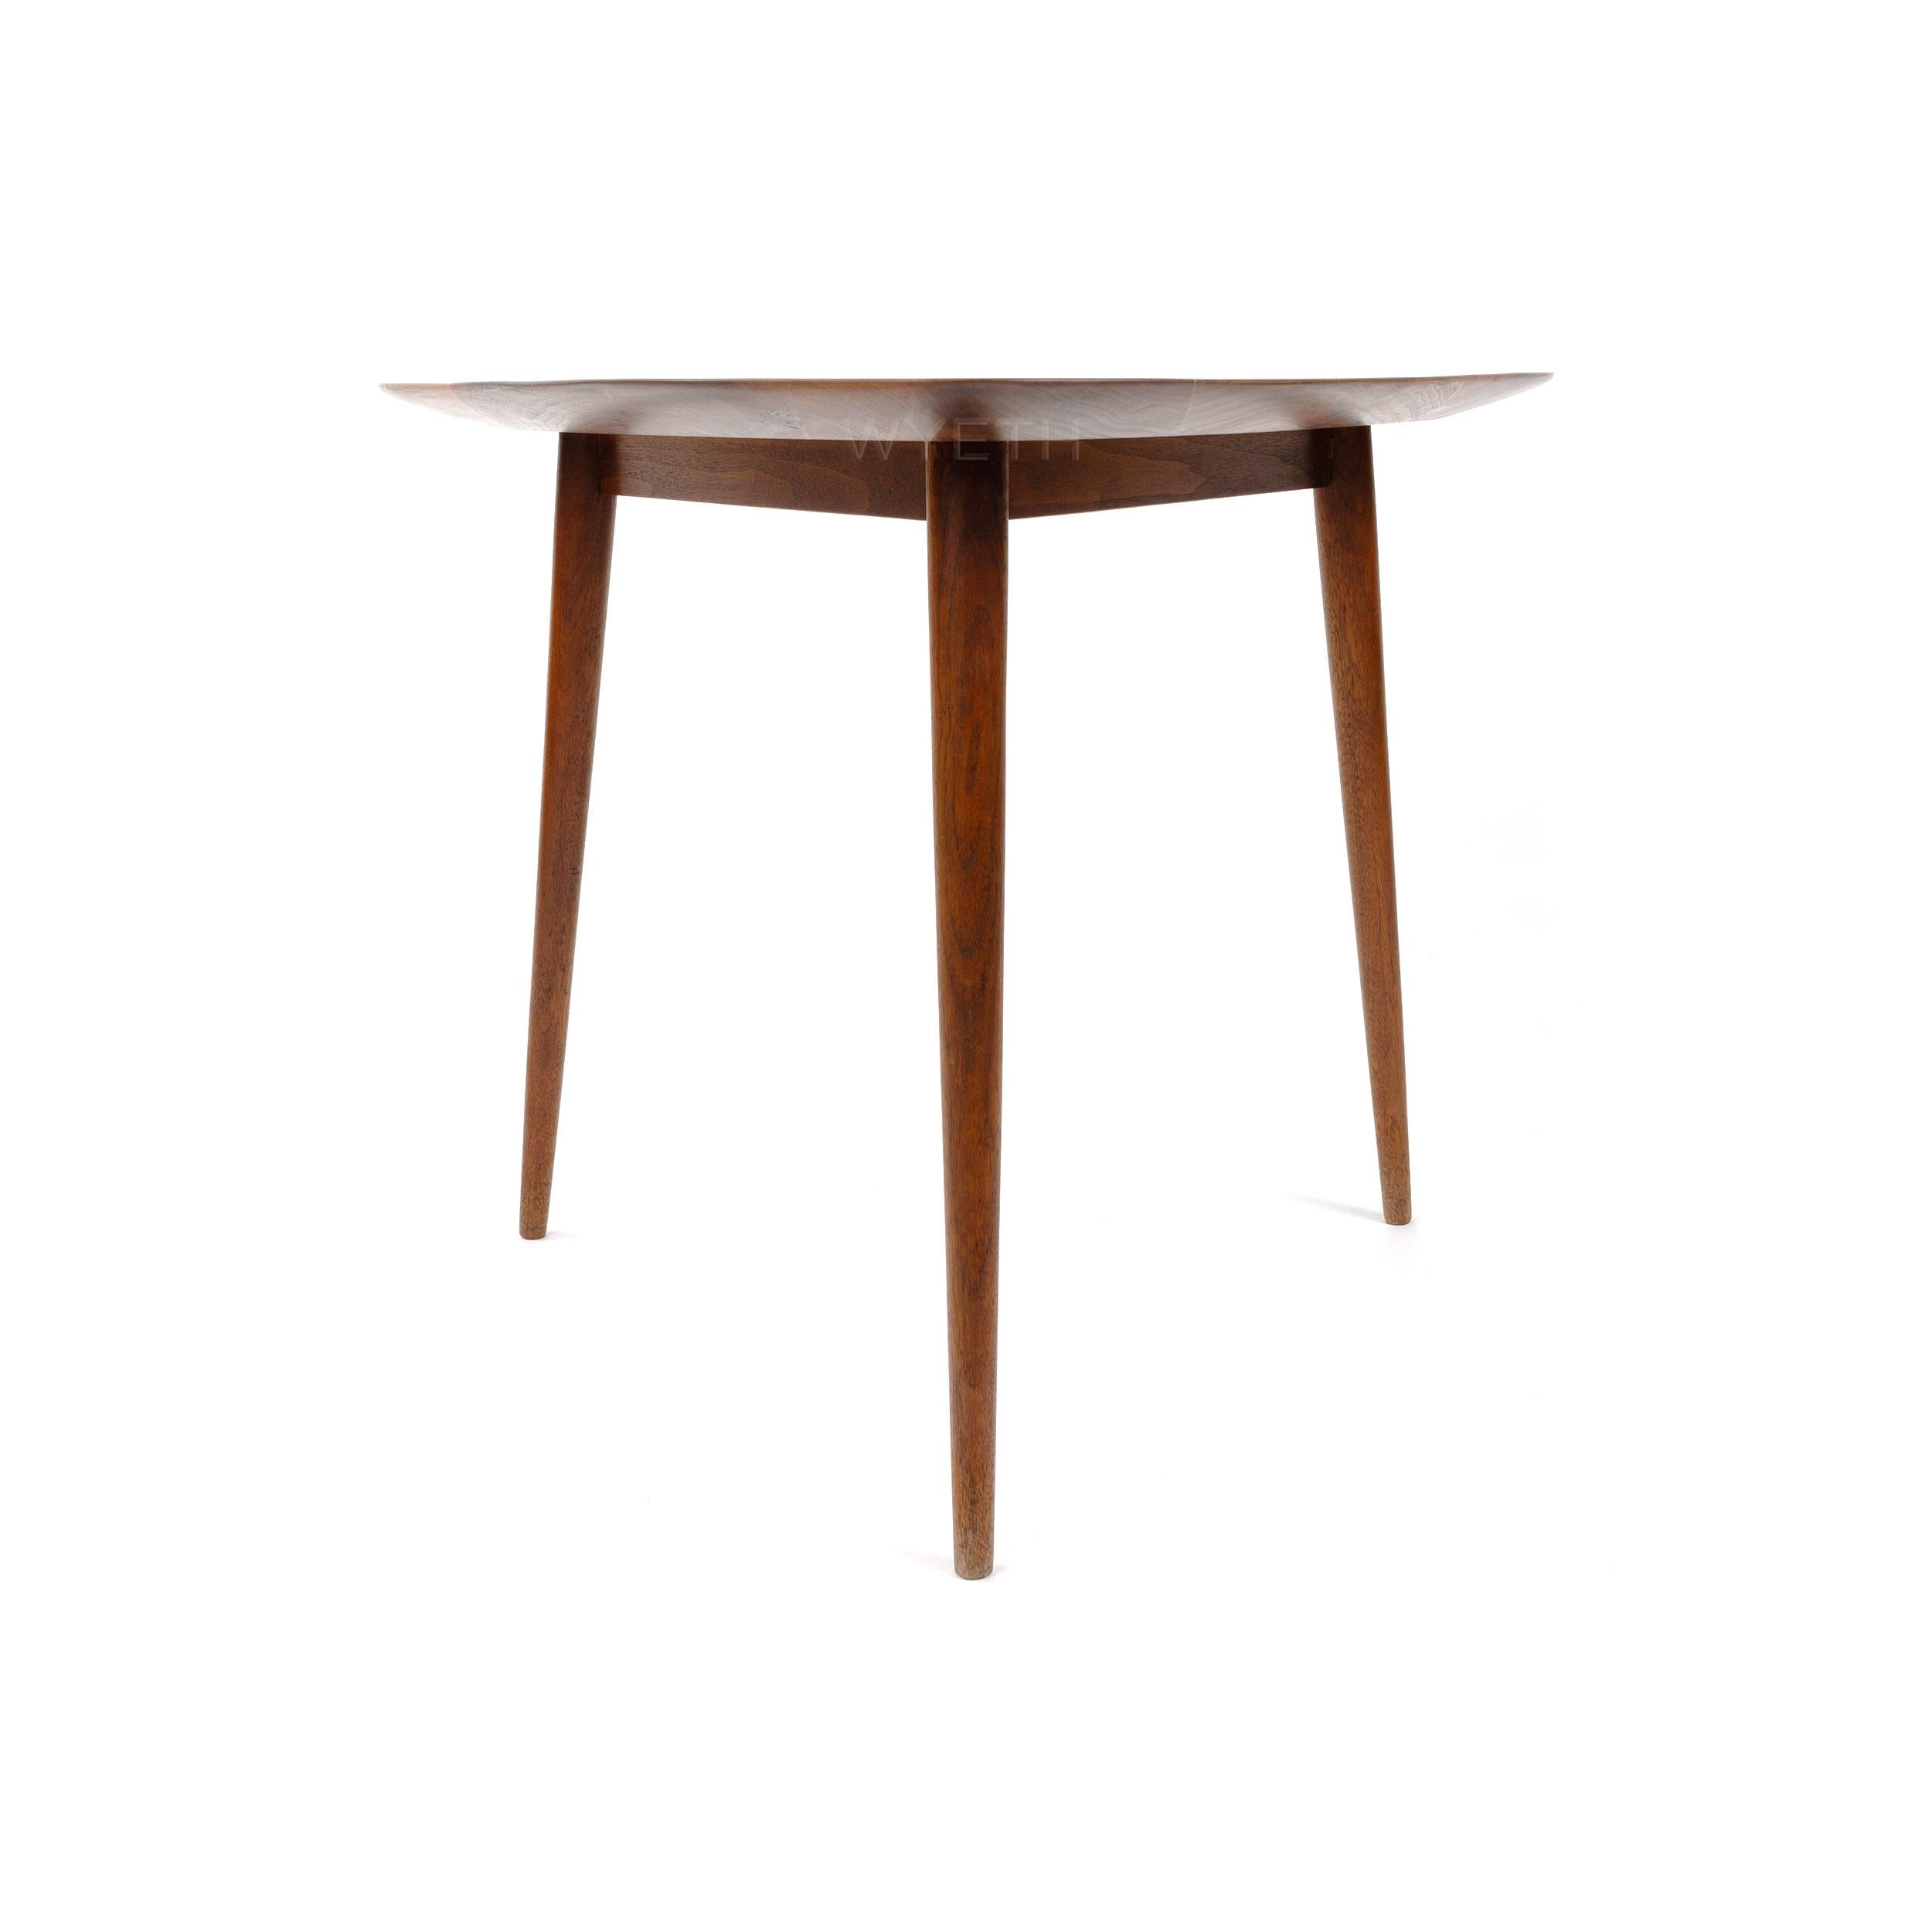 A simple handcrafted side/end table with a top of richly grained walnut and three splayed dowel legs joined to the top with through tenons.